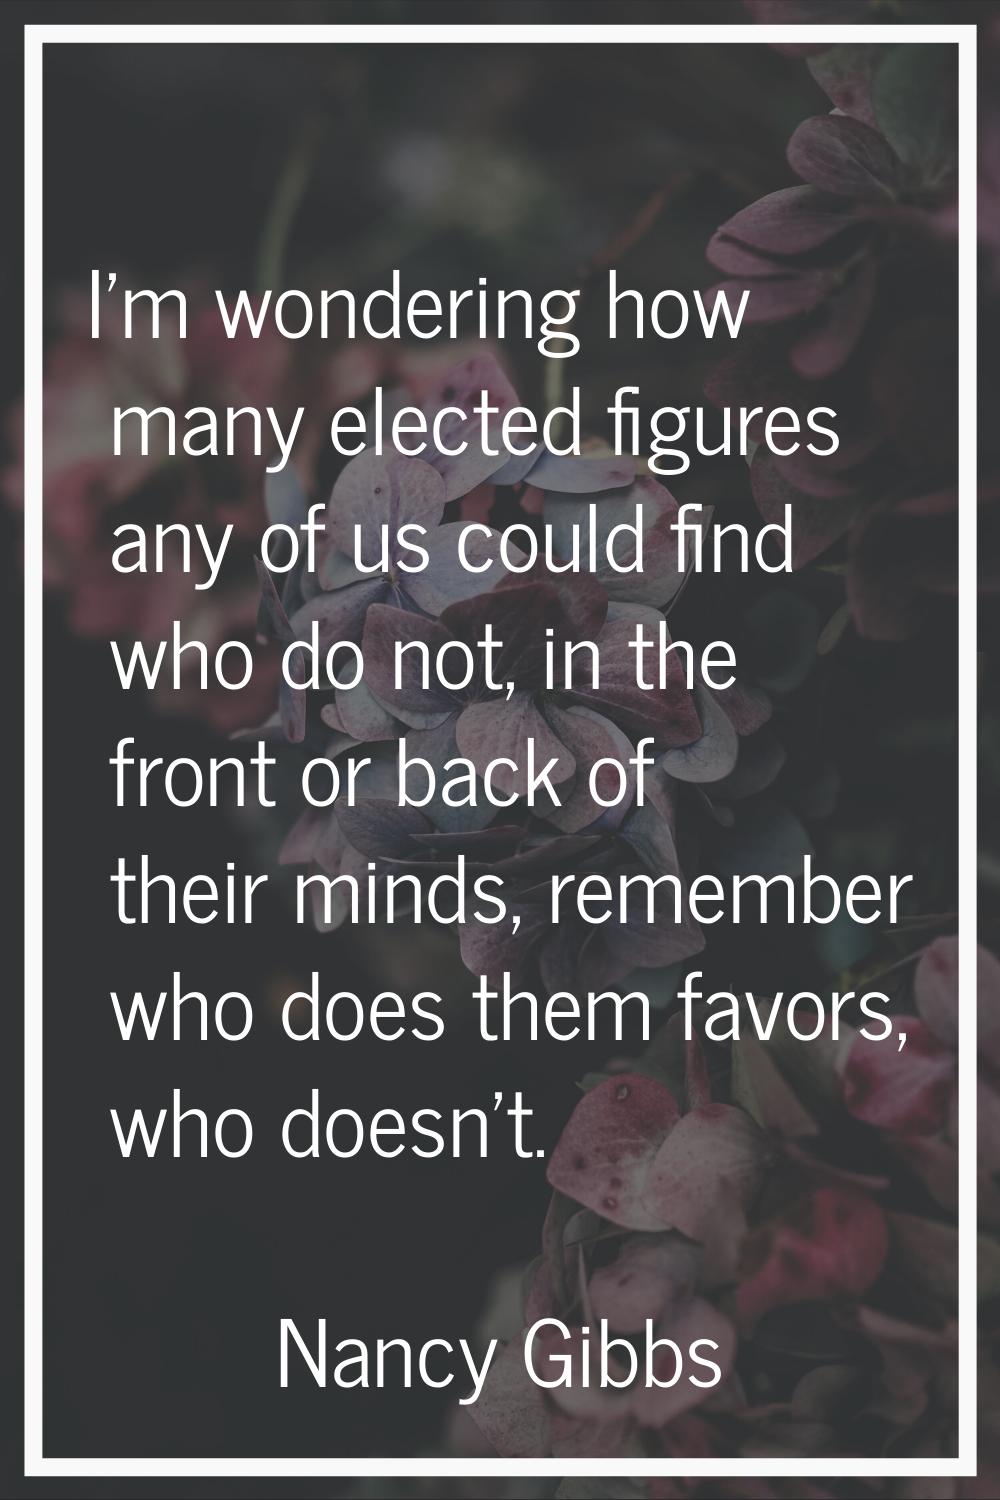 I'm wondering how many elected figures any of us could find who do not, in the front or back of the